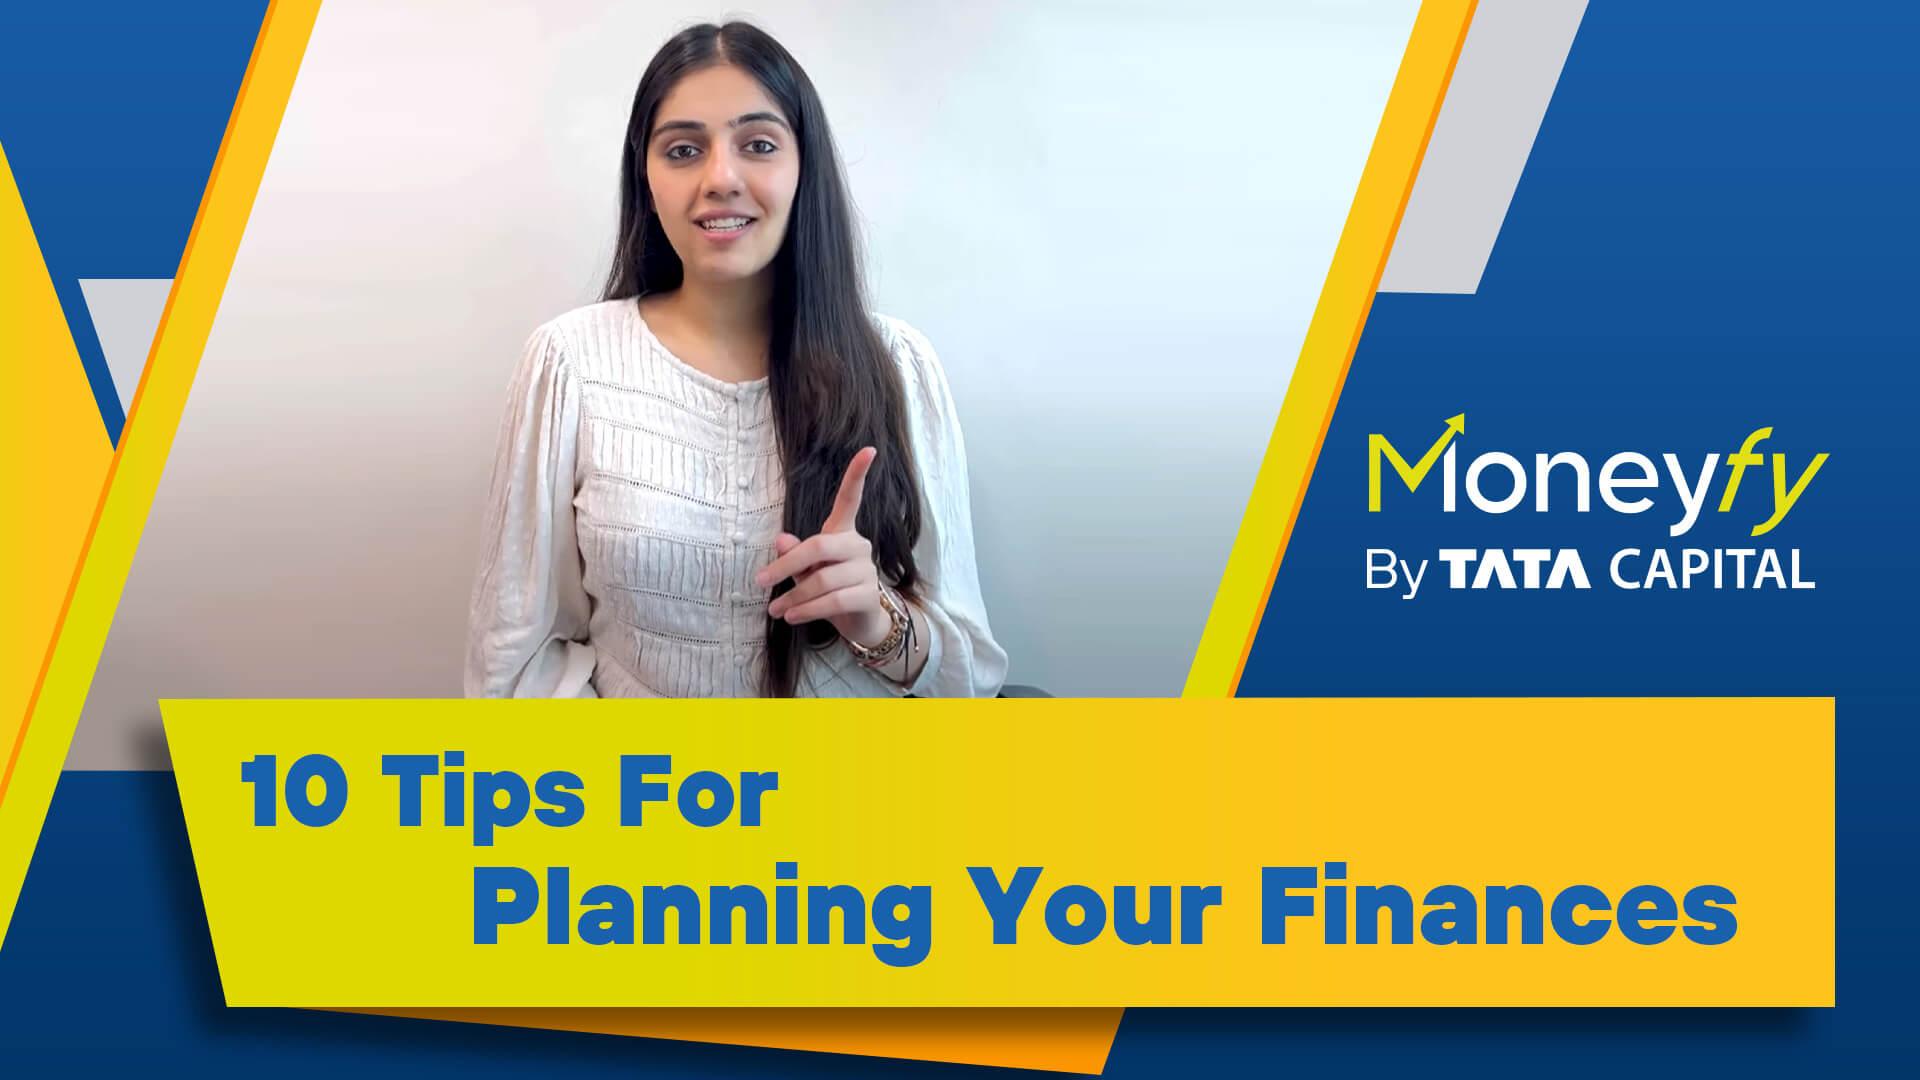 10 tips to handle your finances well